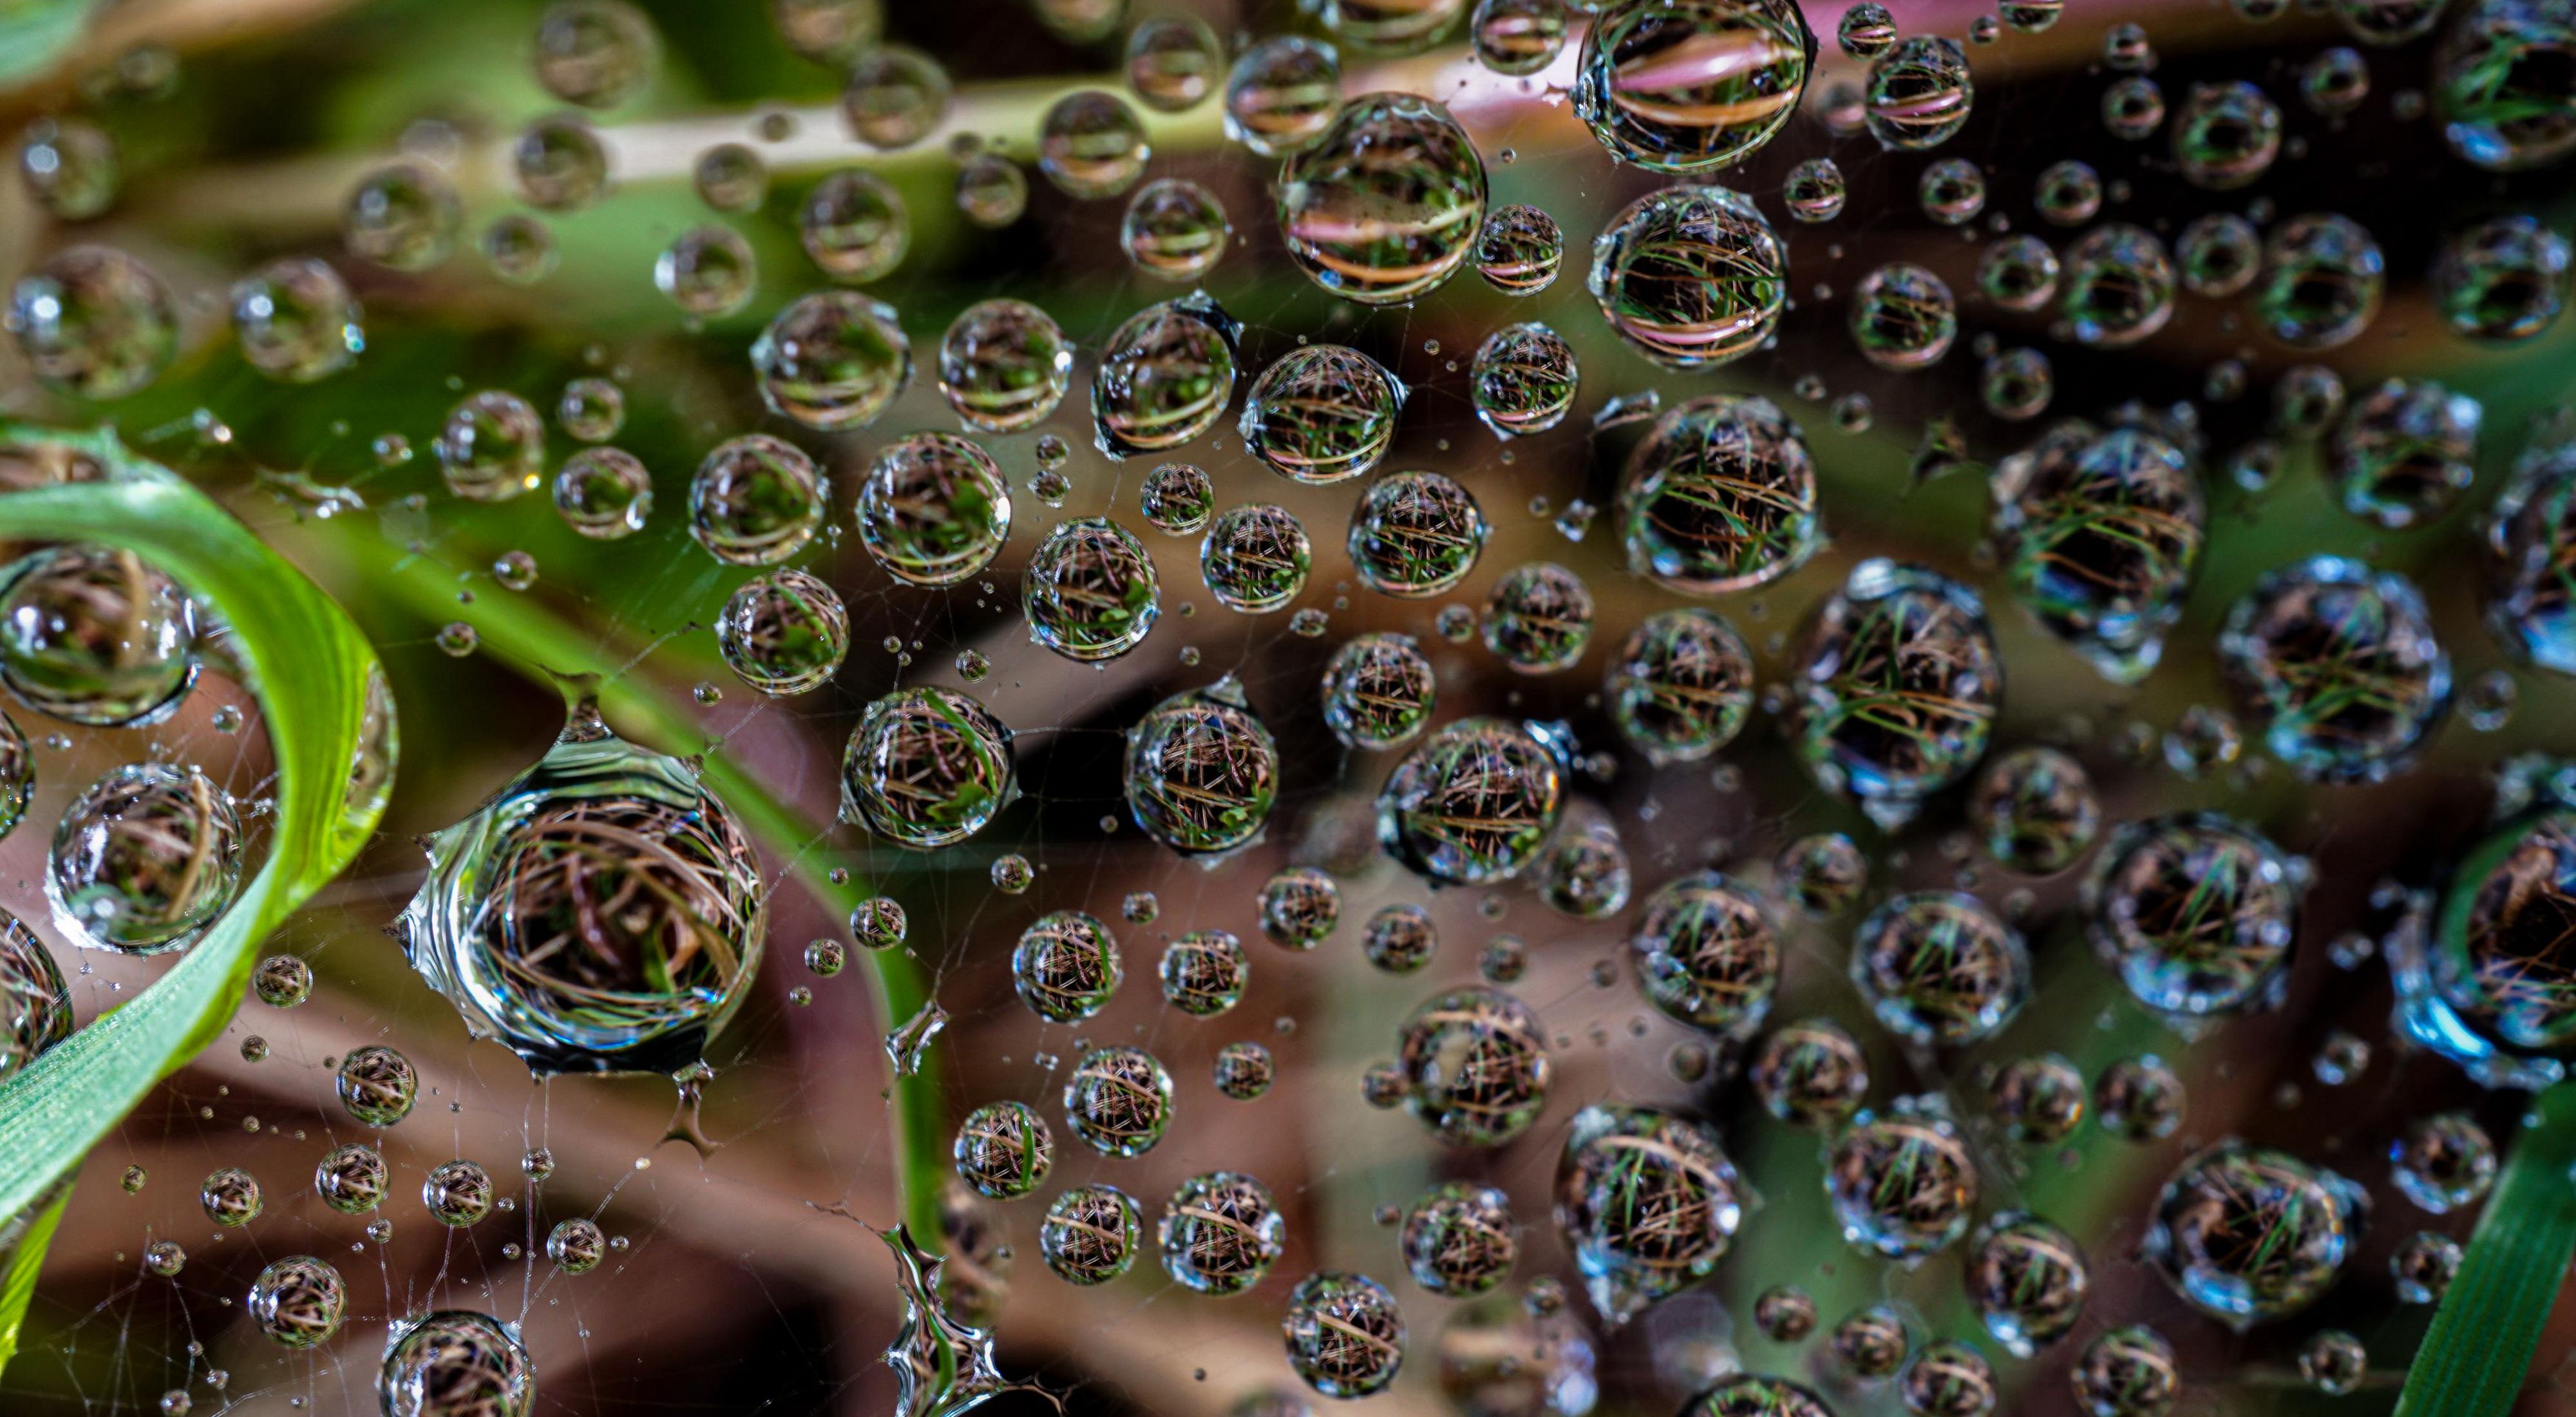 Closeup view of dozens of tiny drops of water in a spider's web, all reflecting the green leaves and brown stems of the plant in which the web lies.